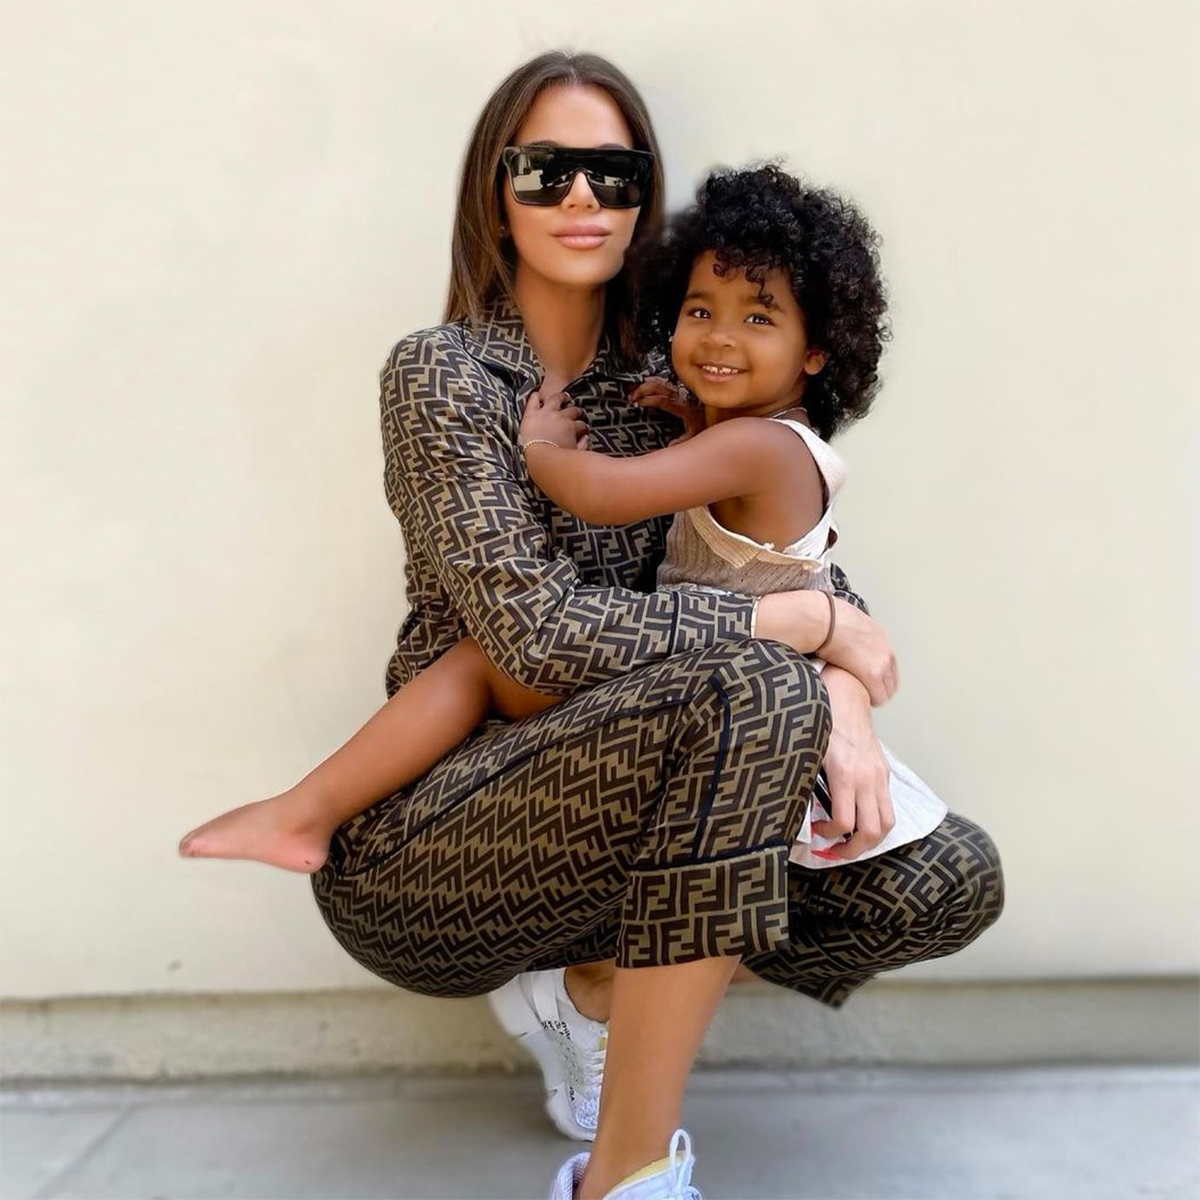 Khloe Kardashian's daughter True Thompson celebrates her upcoming fourth  birthday during a party